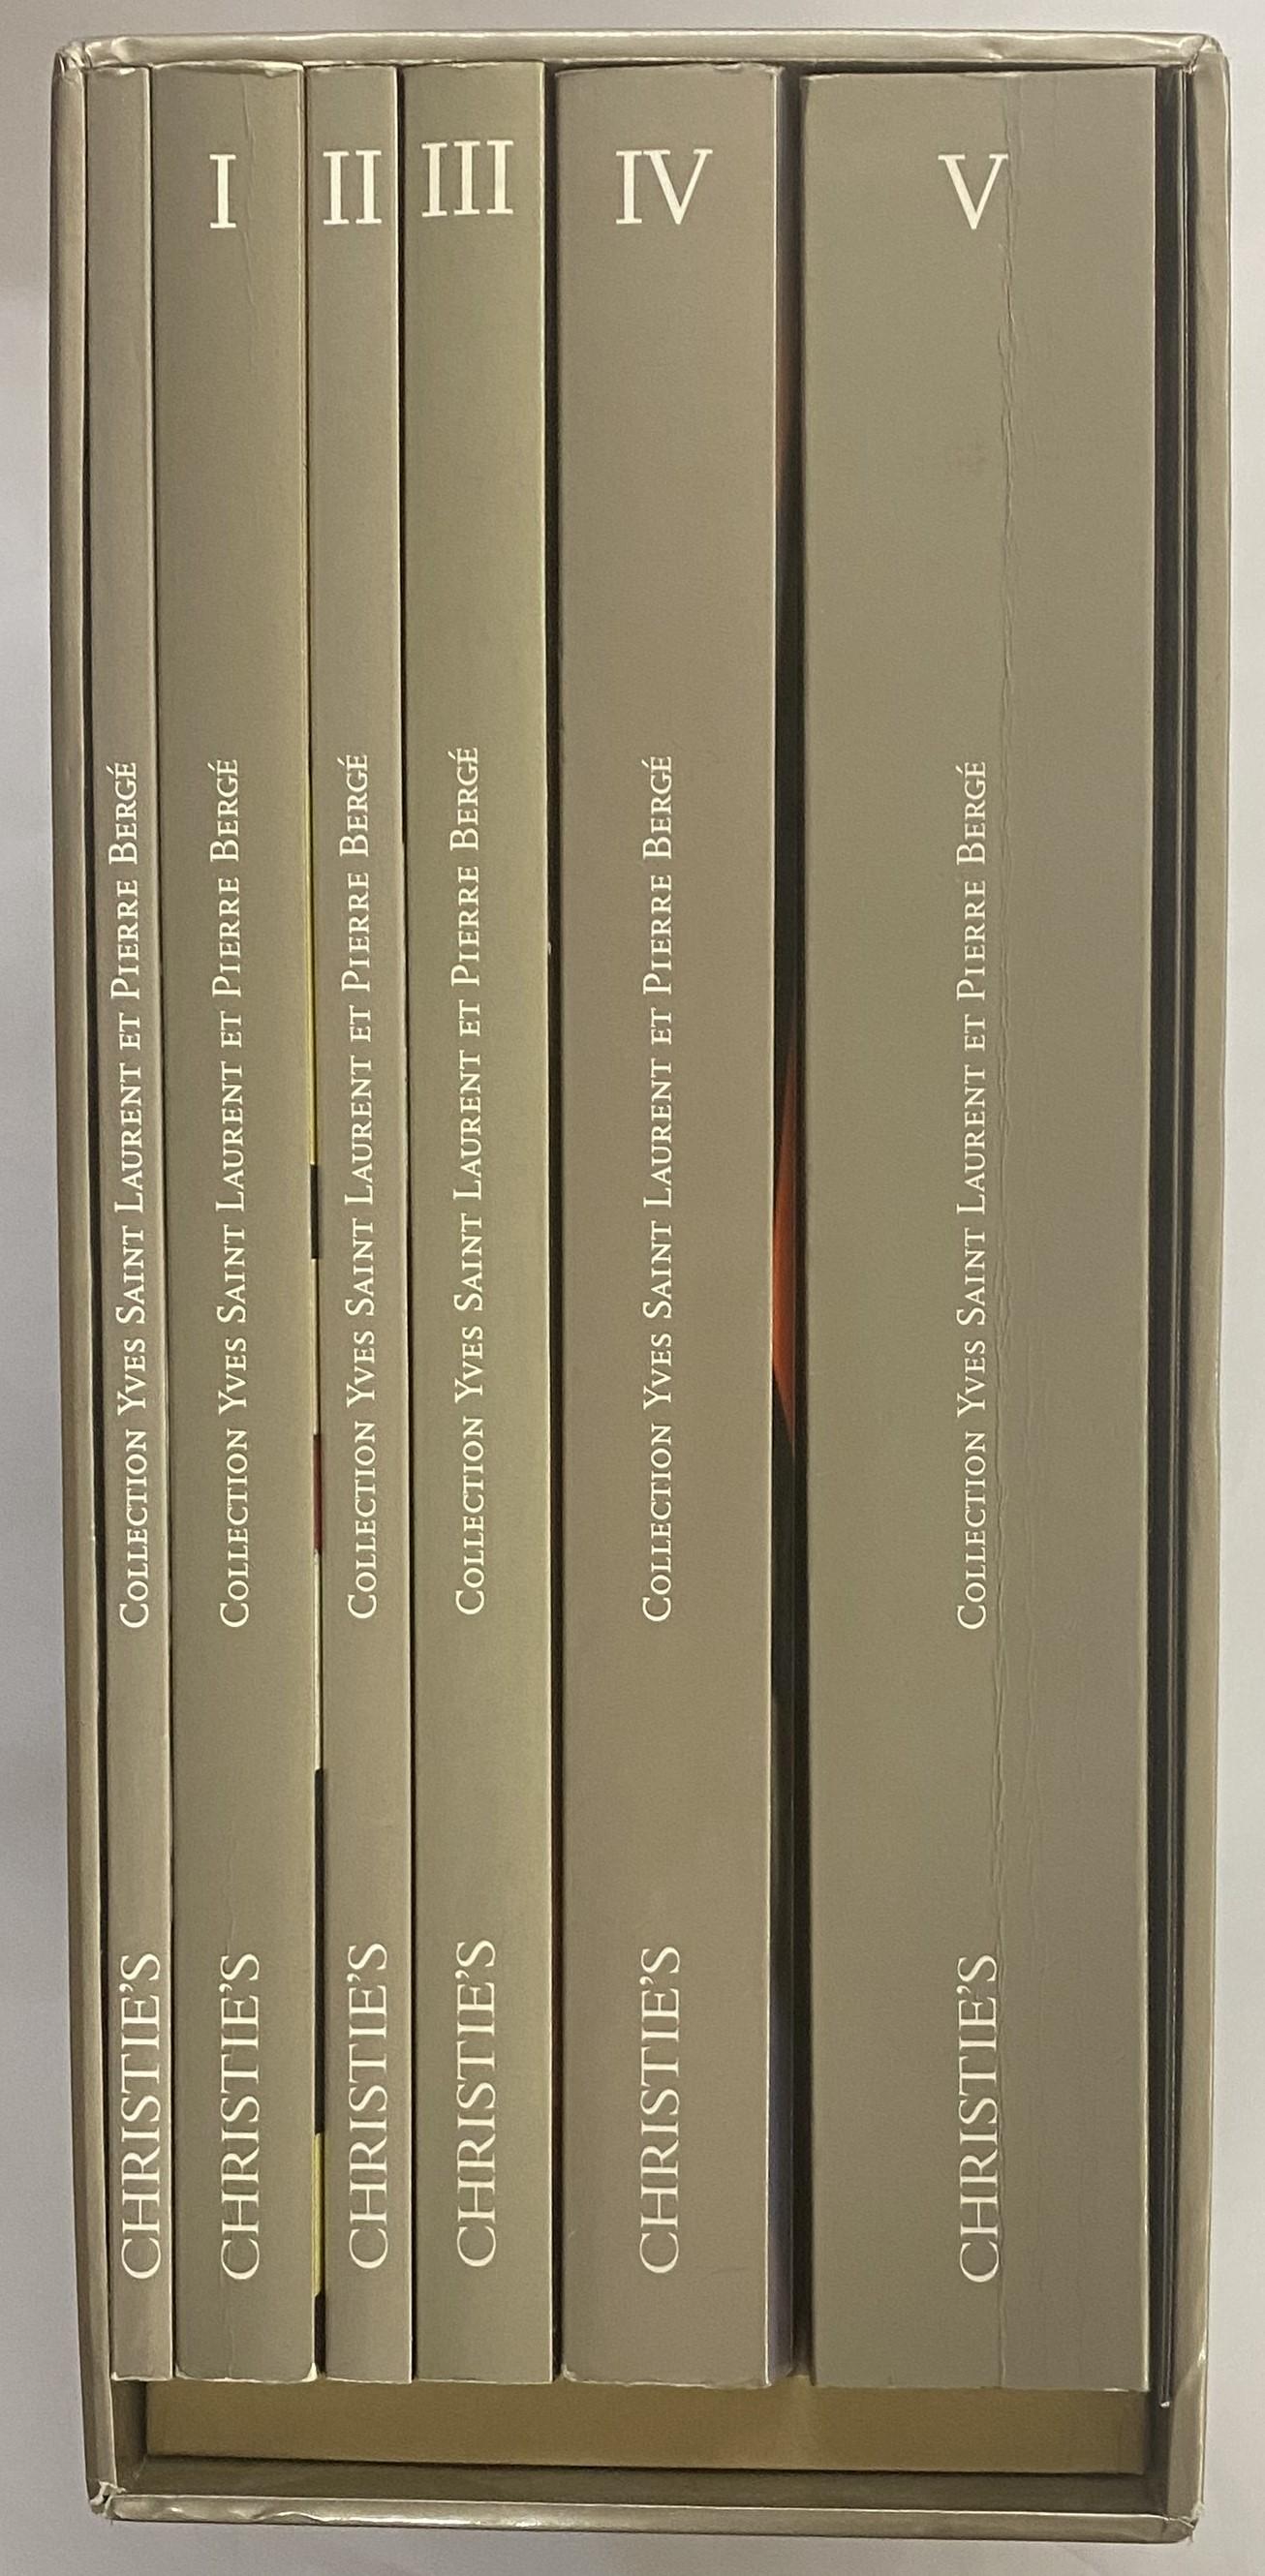 This is a very good set of the sales catalogues produced by Christie's for the sale of the magnificent collection put together by Yves Saint Laurent and Pierre Berge, 23rd - 25th February 2009, which included many amazing pieces and the auction set